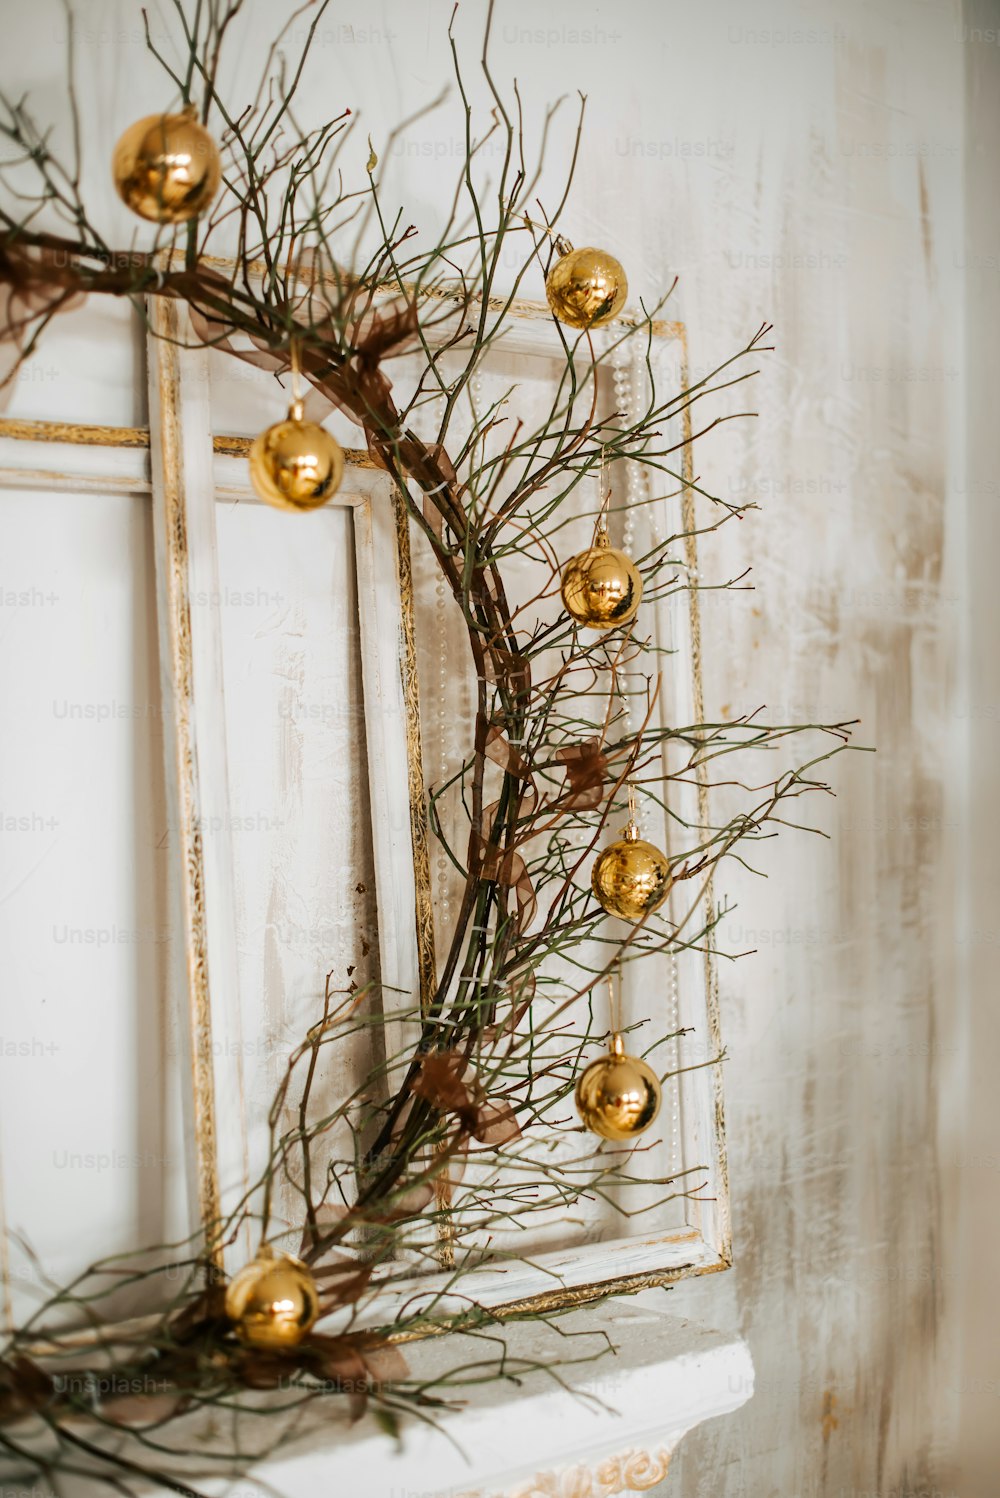 a wreath on a window sill with gold ornaments